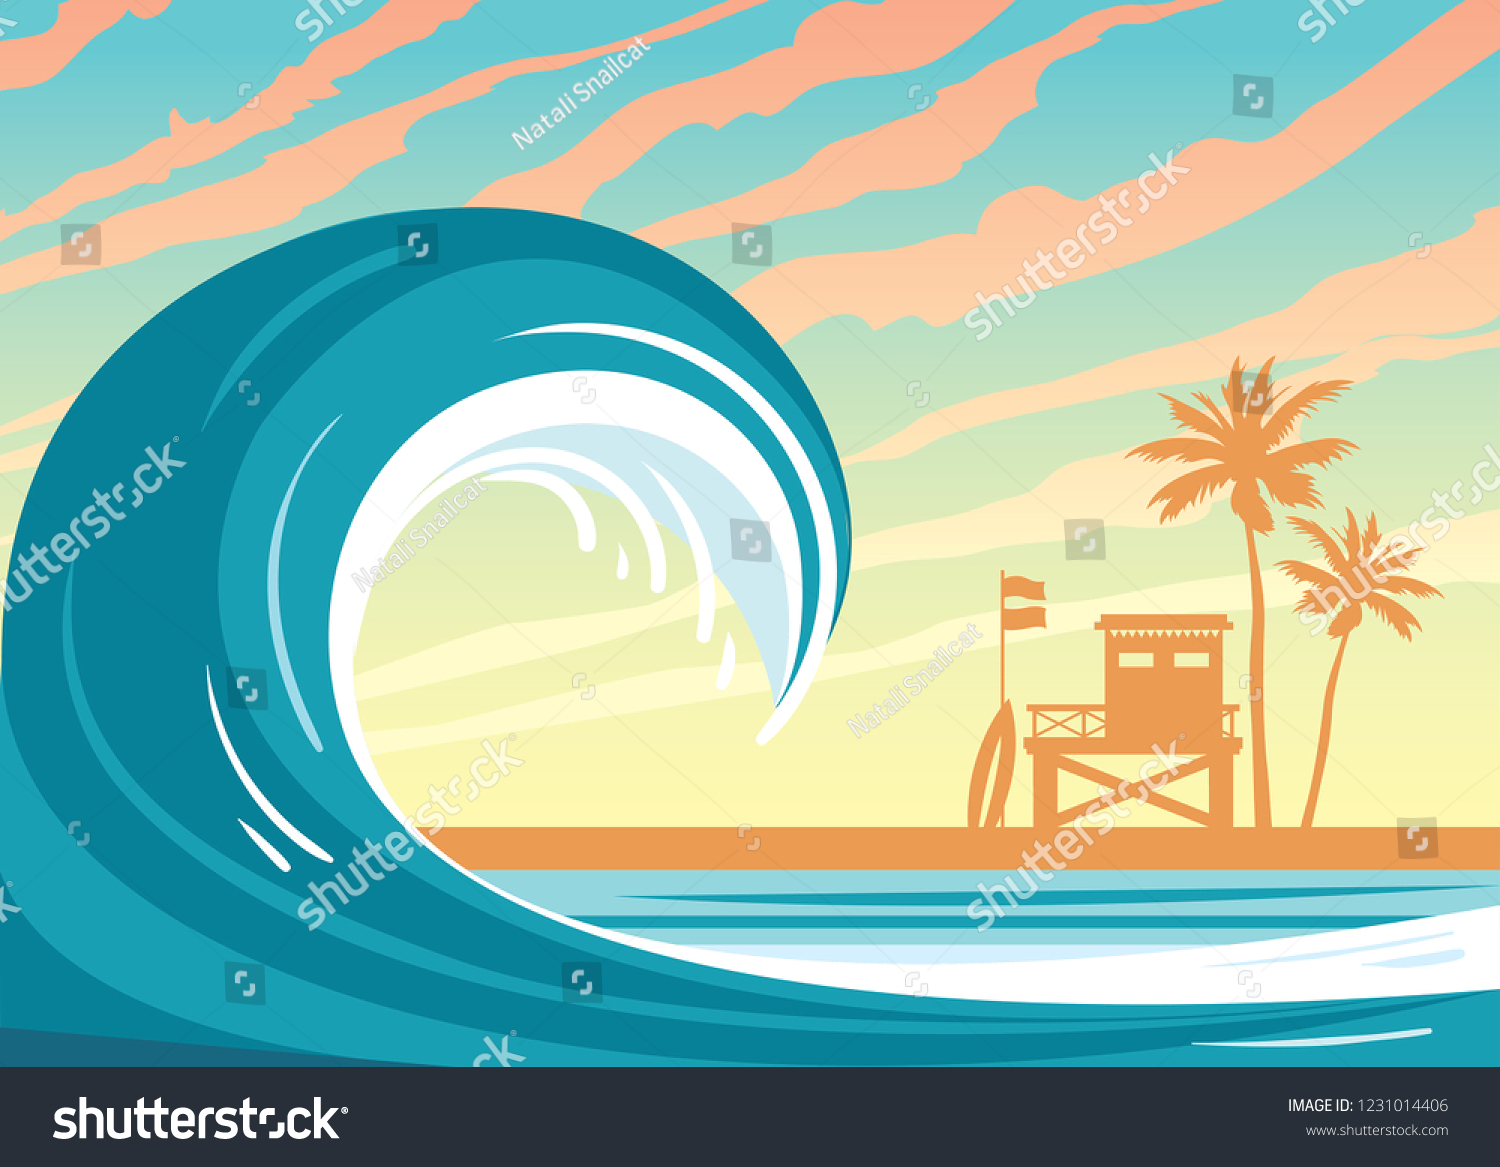 SVG of Nature landscape with big wave in a blue sea, silhouette of  lifeguard station, palm tree and sunset sky. Vector illustration. Summer holiday card. svg